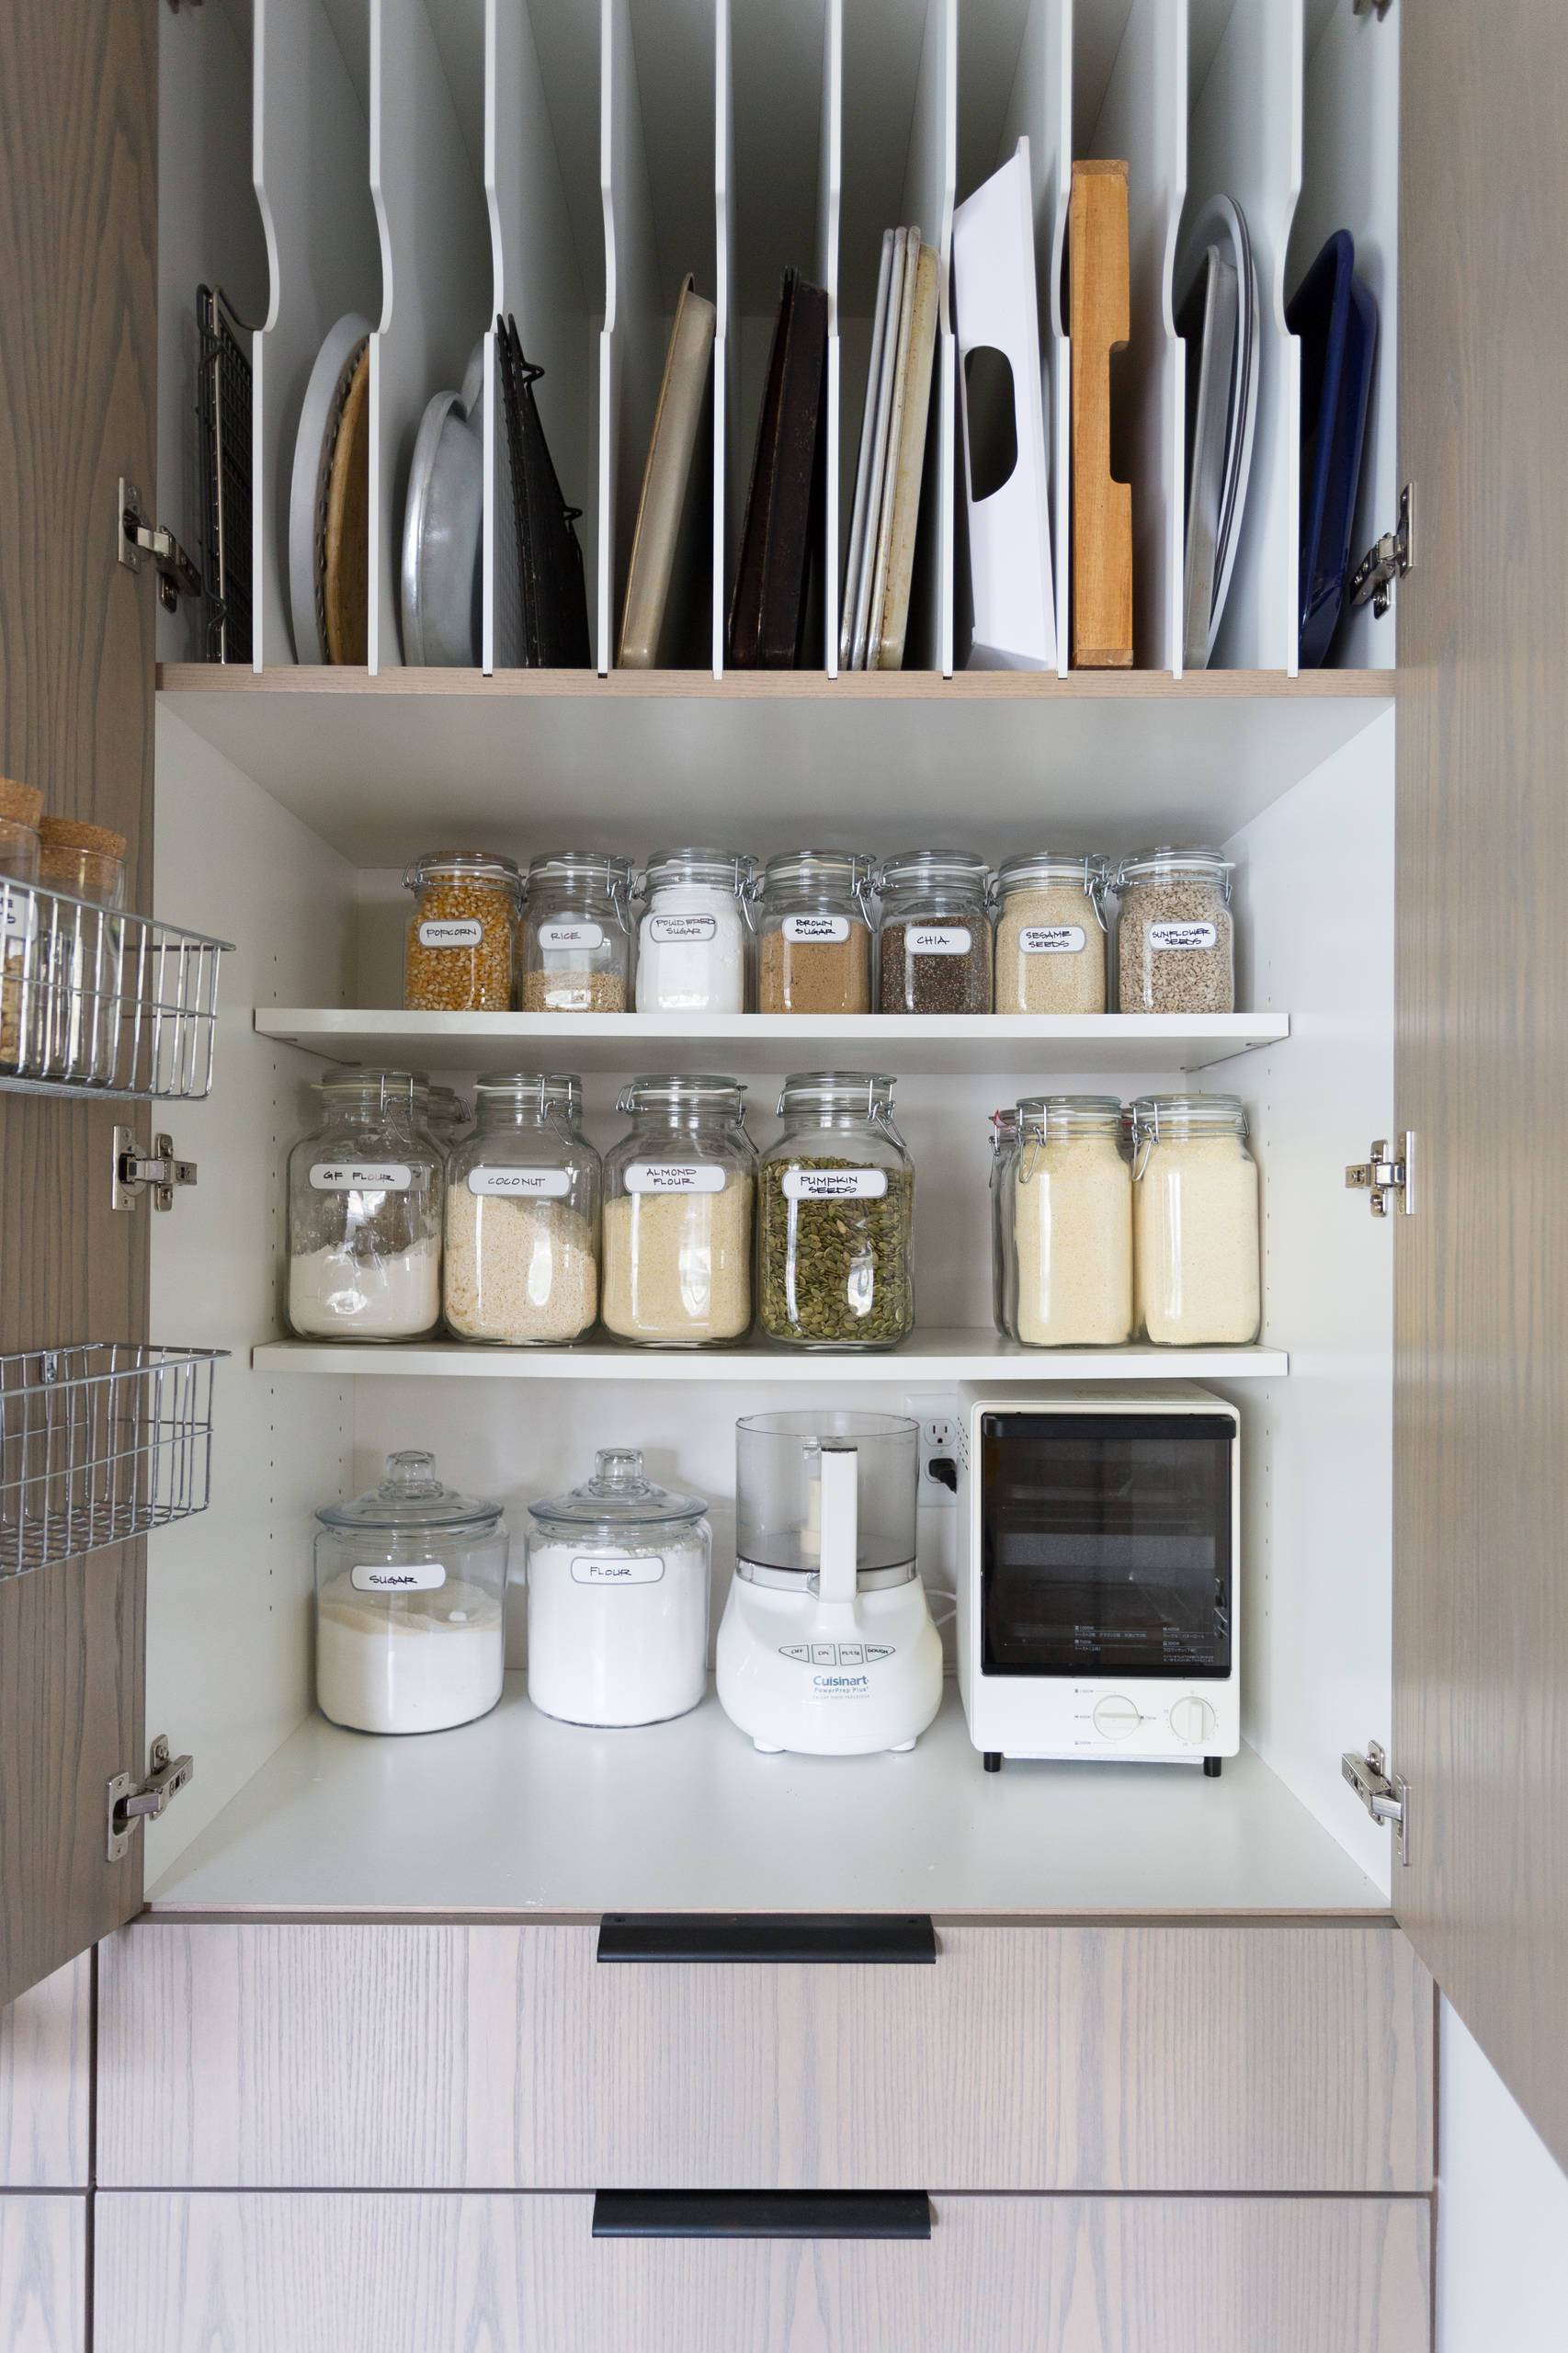 storage in cabinets